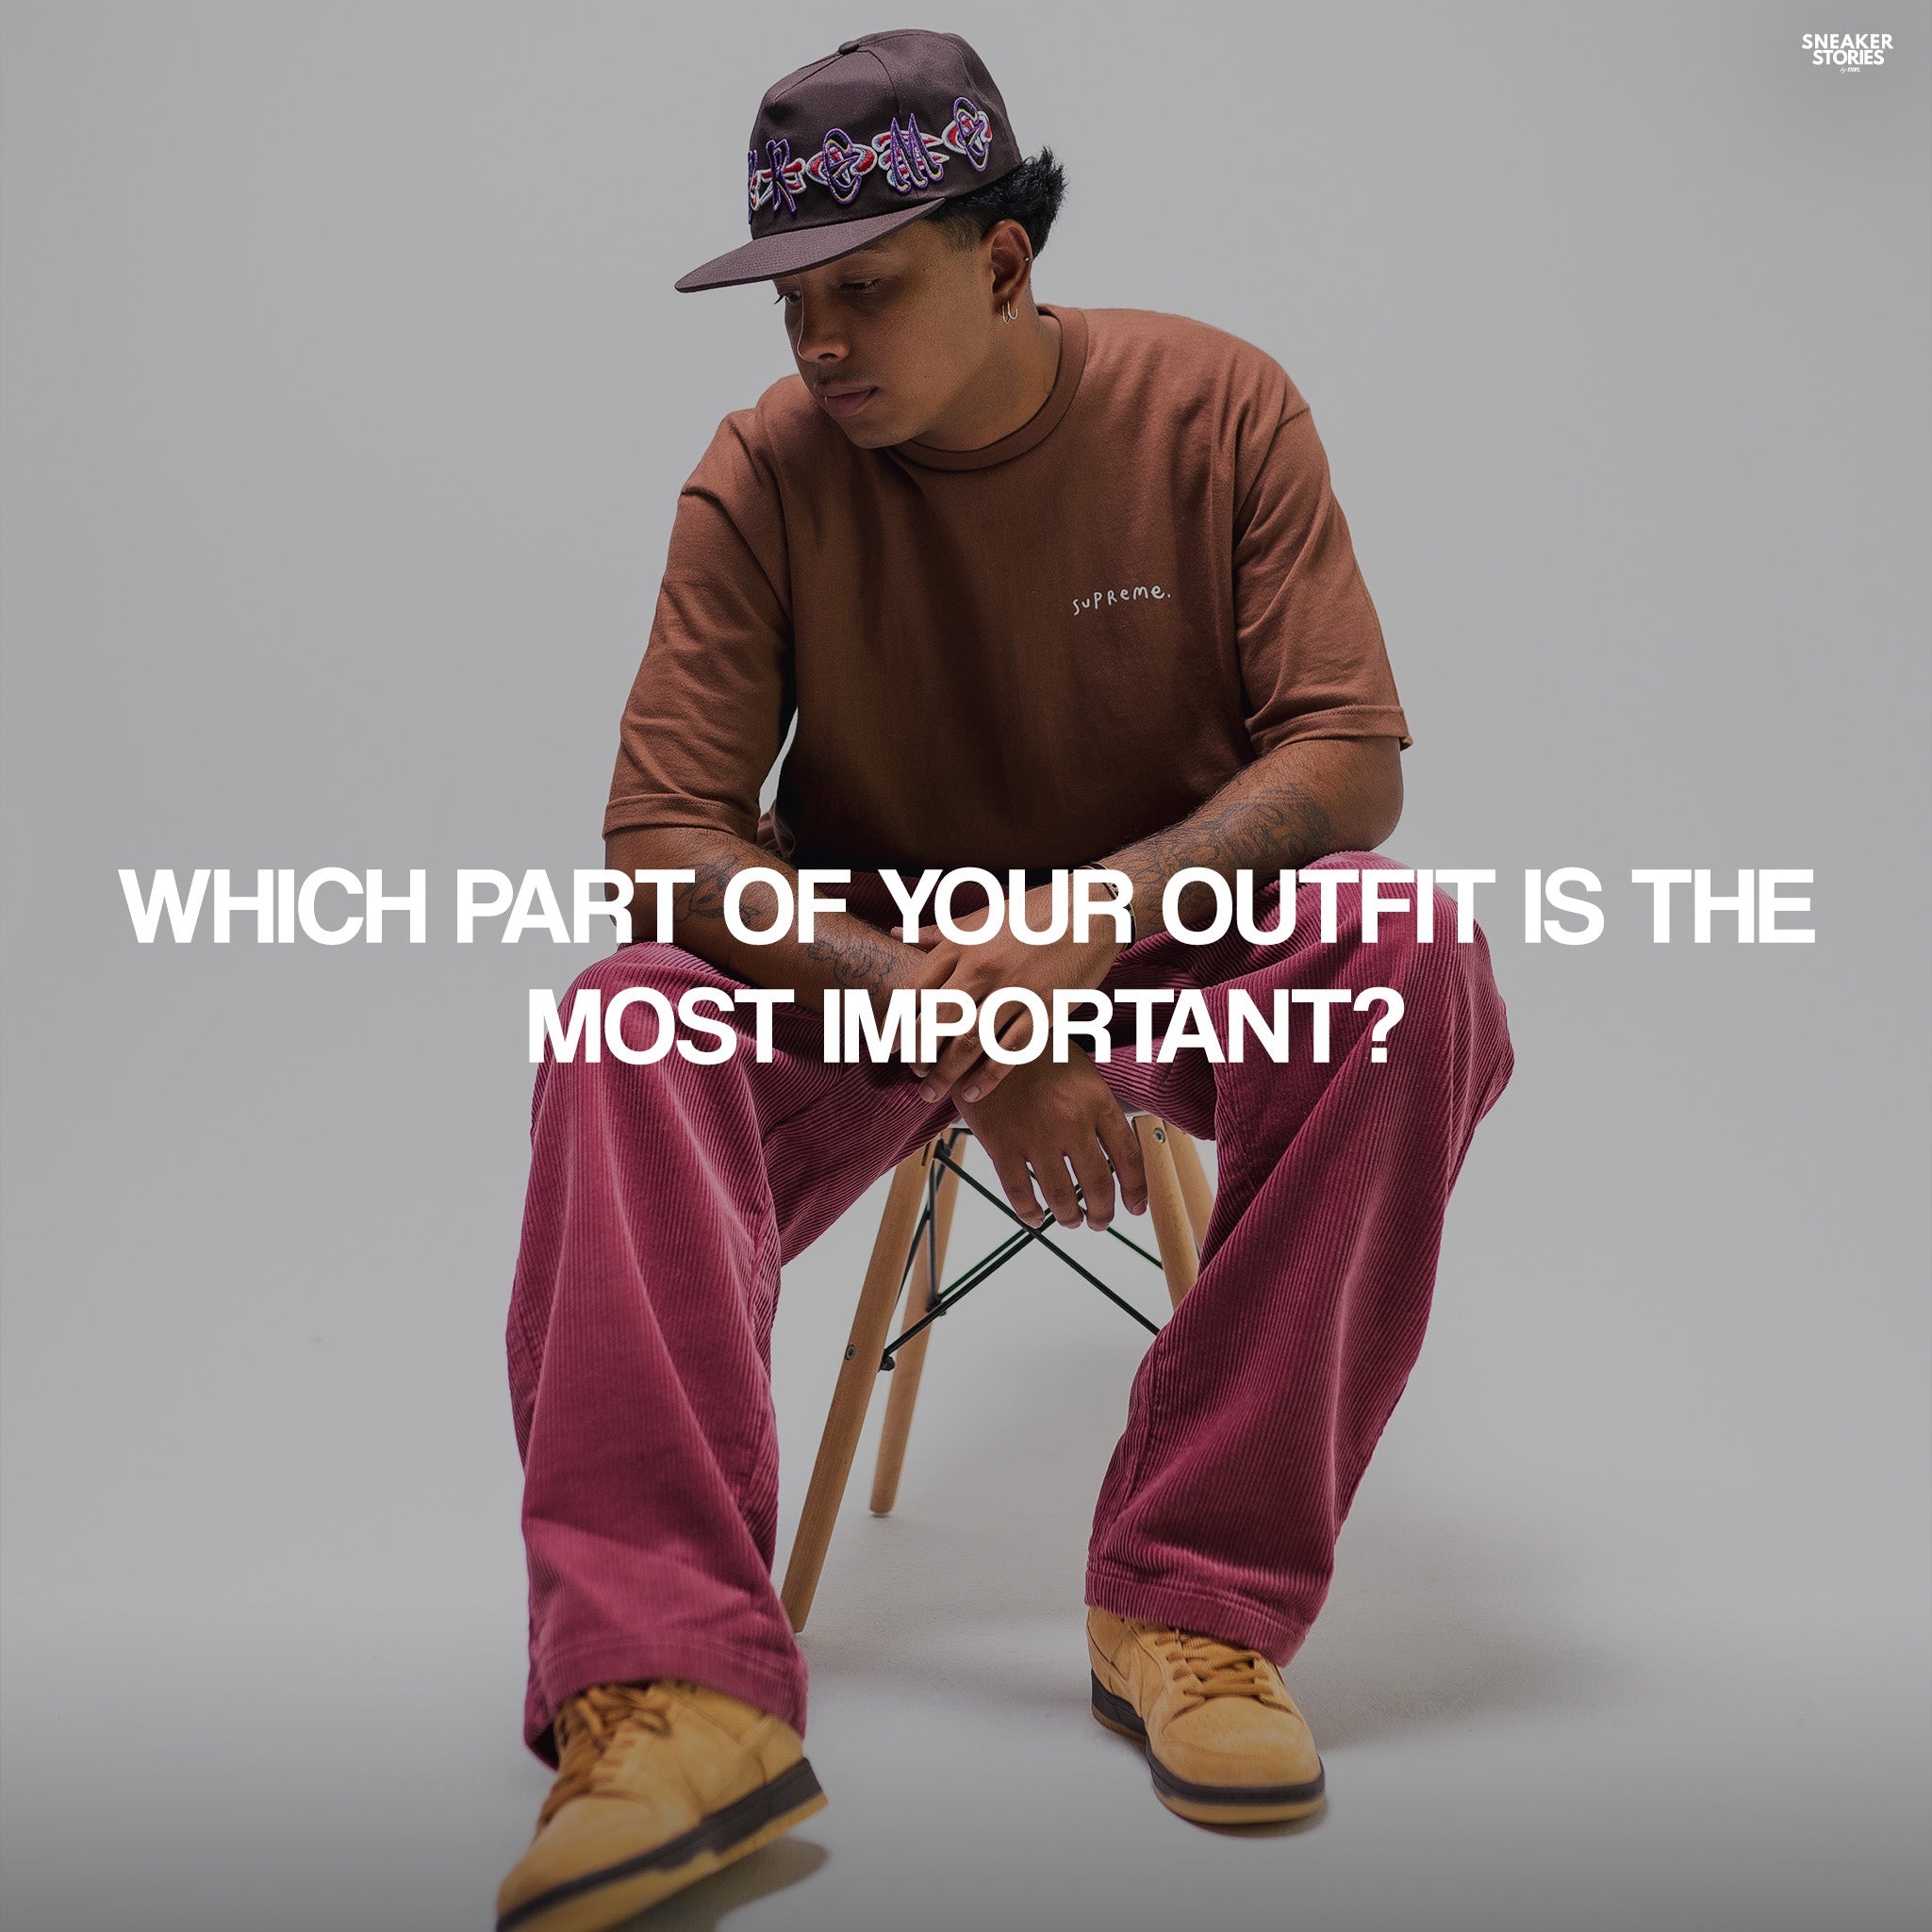 Which part of your outfit is the most important?